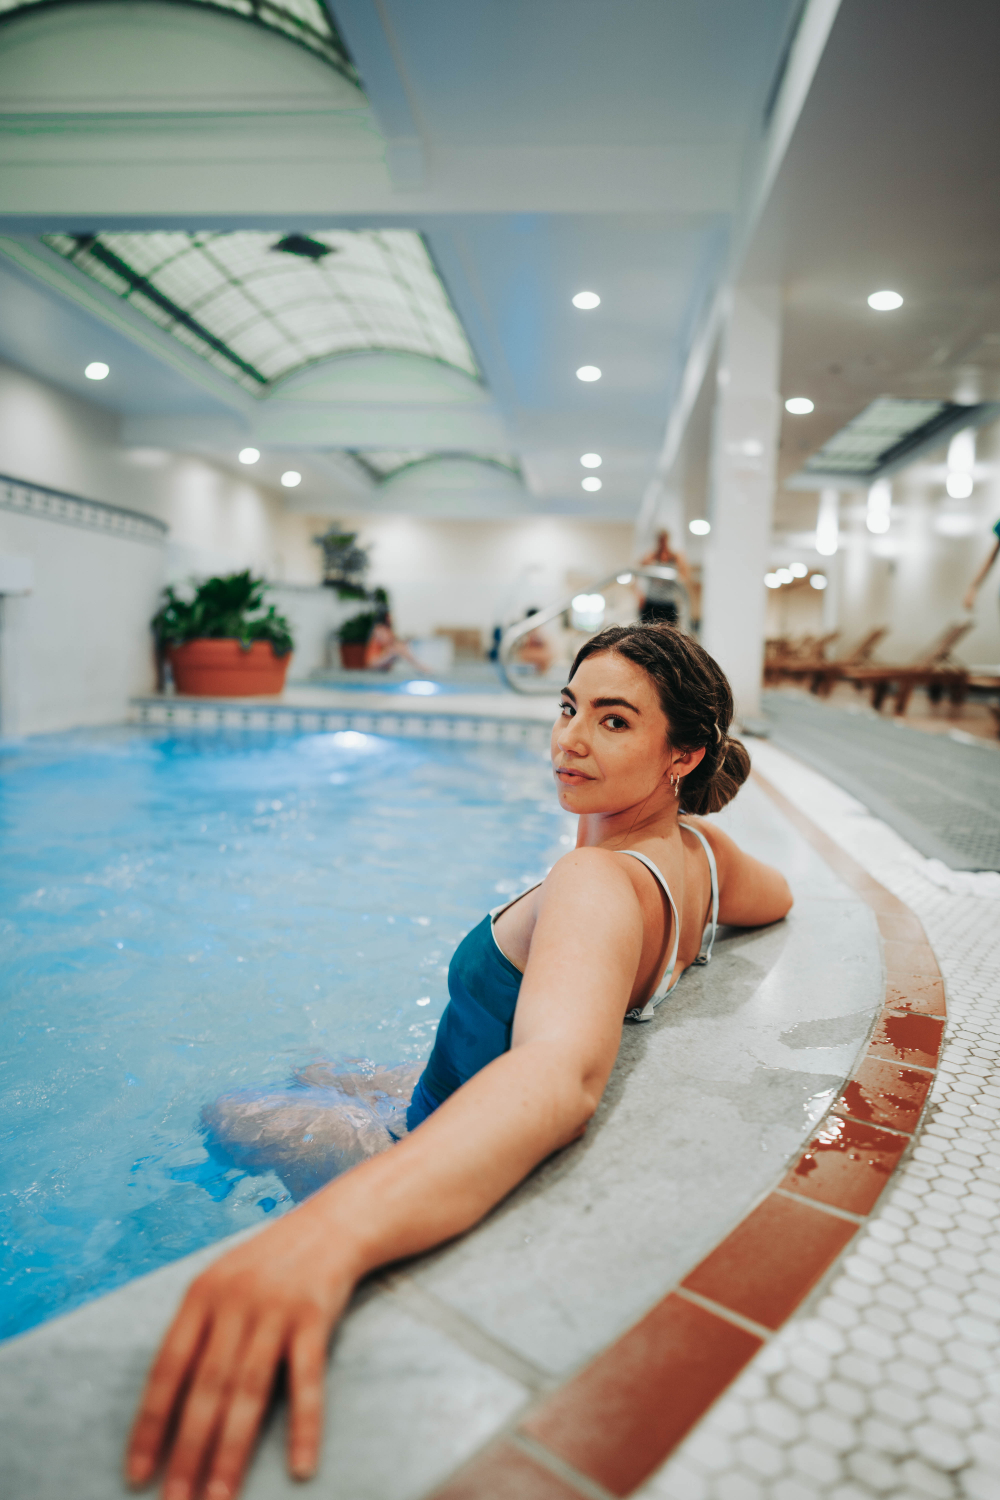 Lauyncakes, travel blogger, content creator, and influencer, sits and soaks in the Quapaw Baths of Hot Springs Arkansas